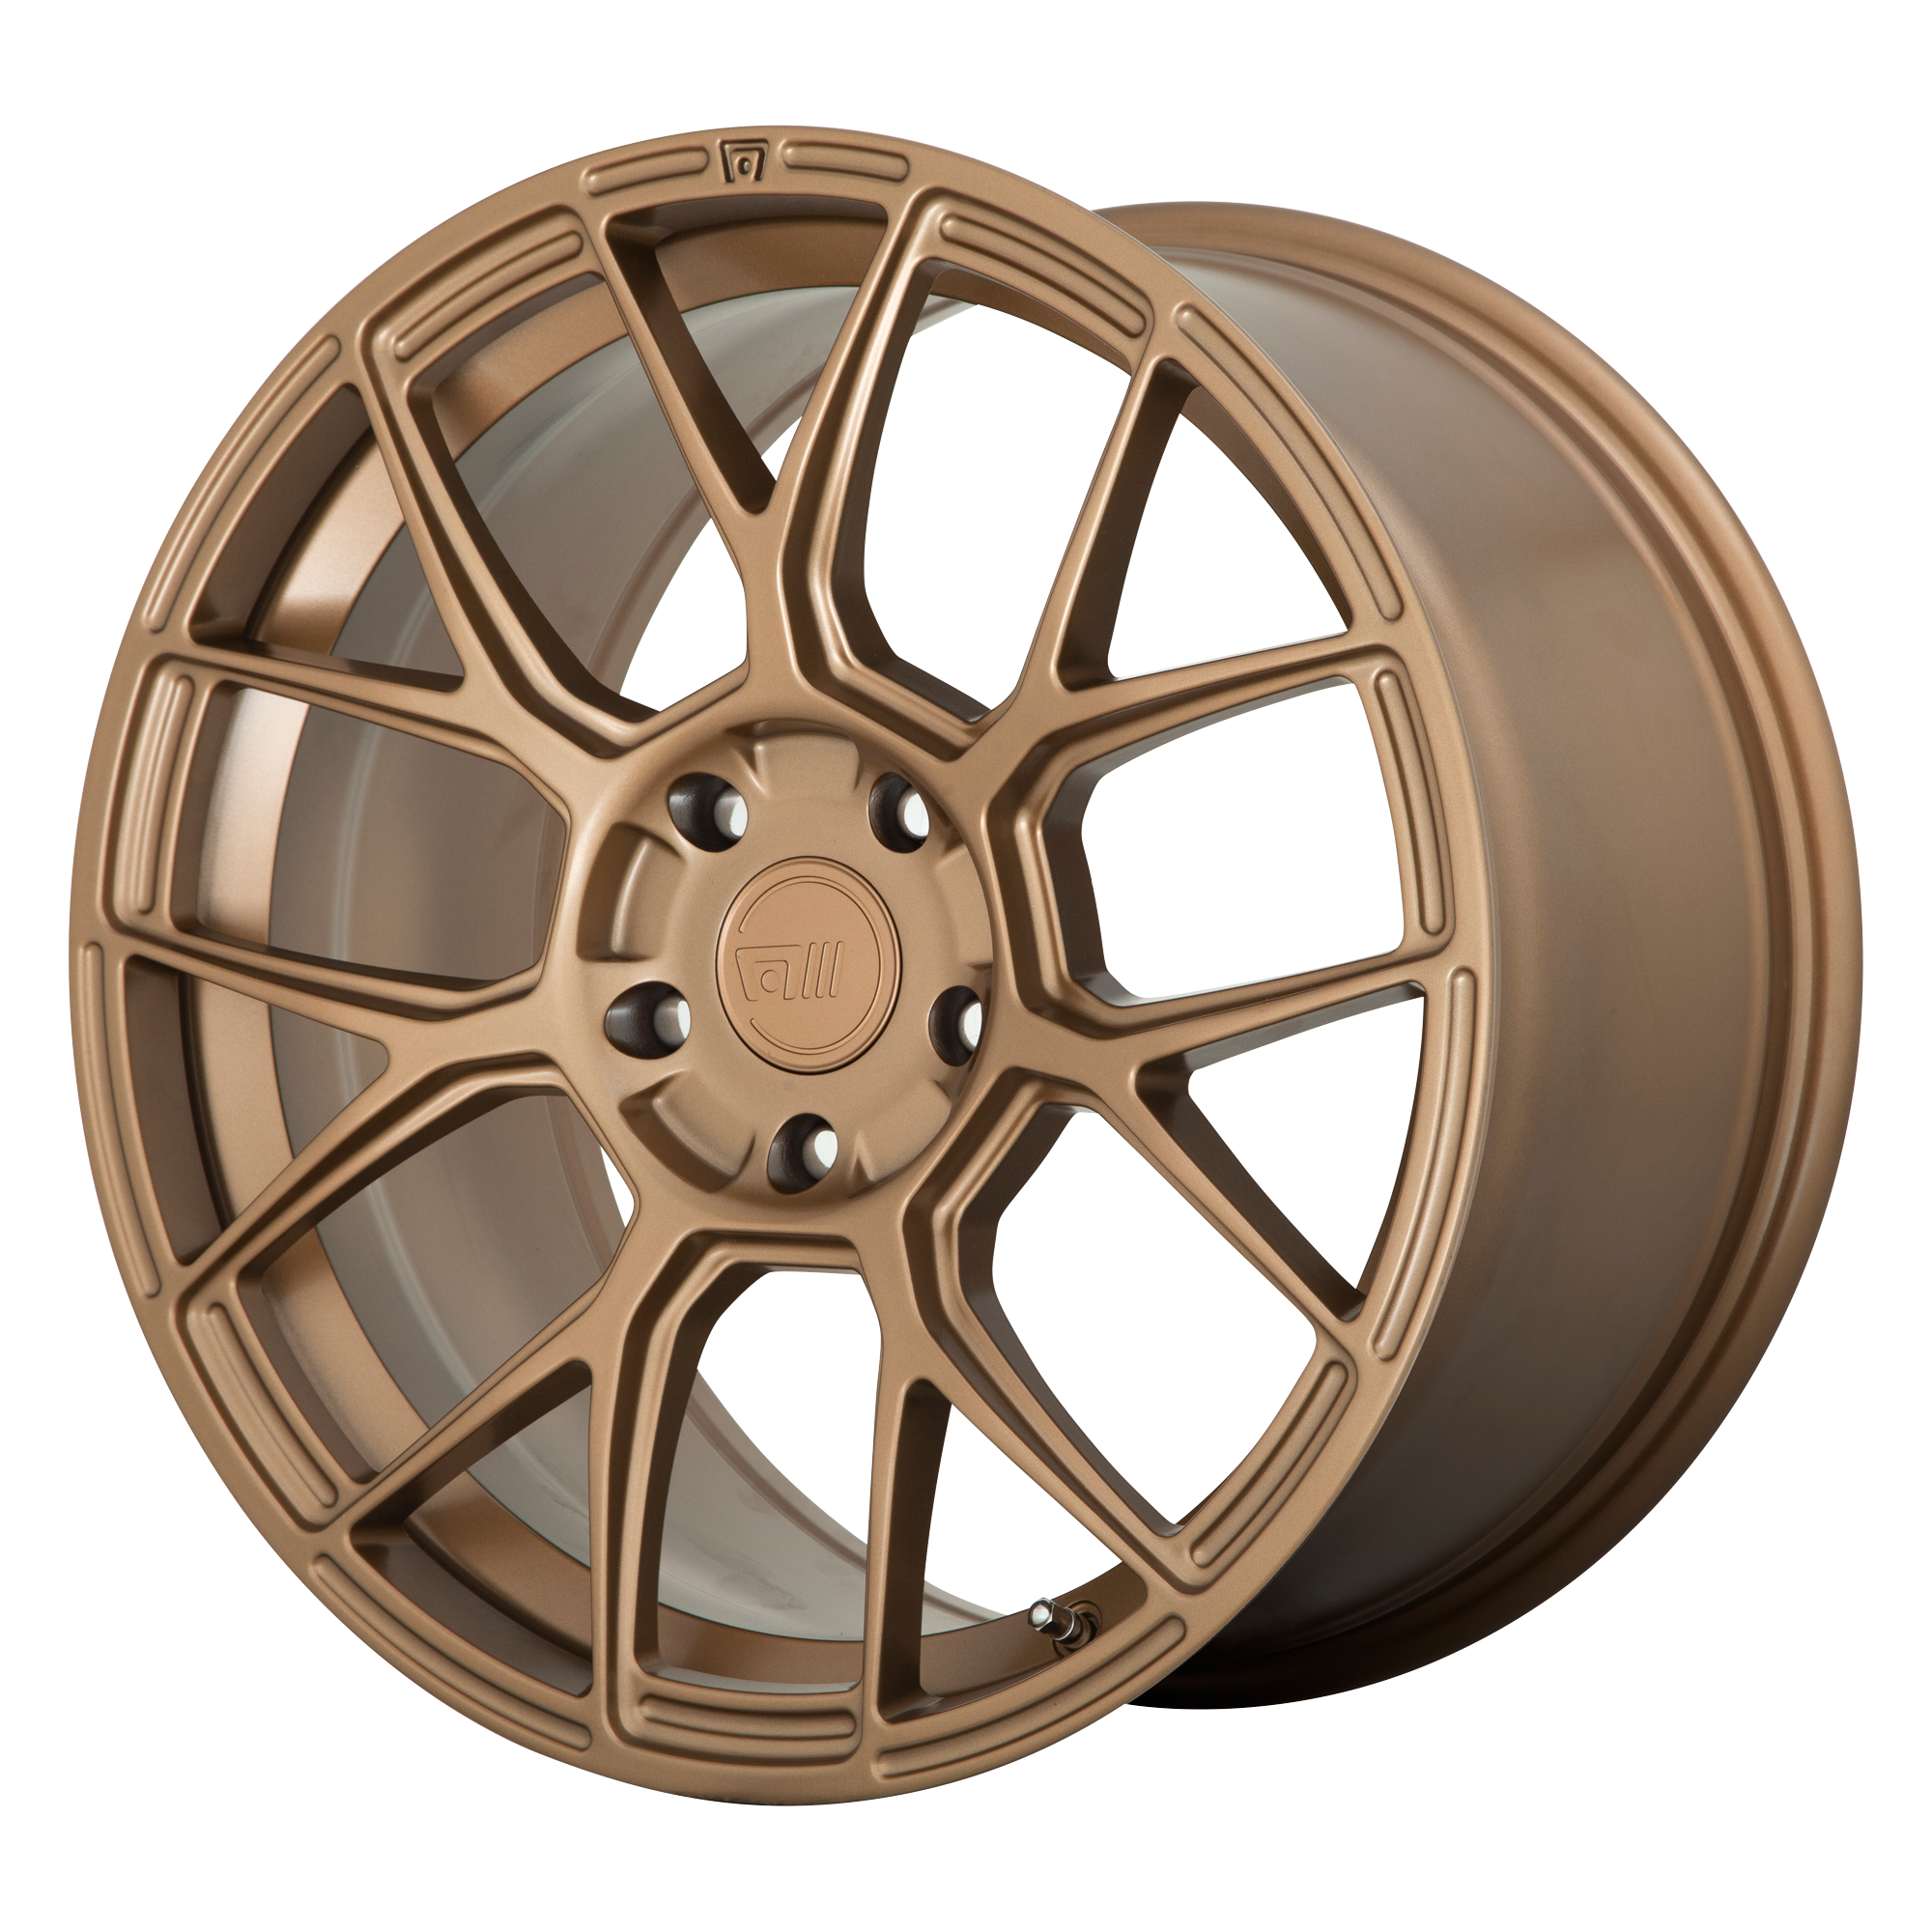 CM7 18x9.5 5x100.00 MATTE BRONZE (45 mm) - Tires and Engine Performance